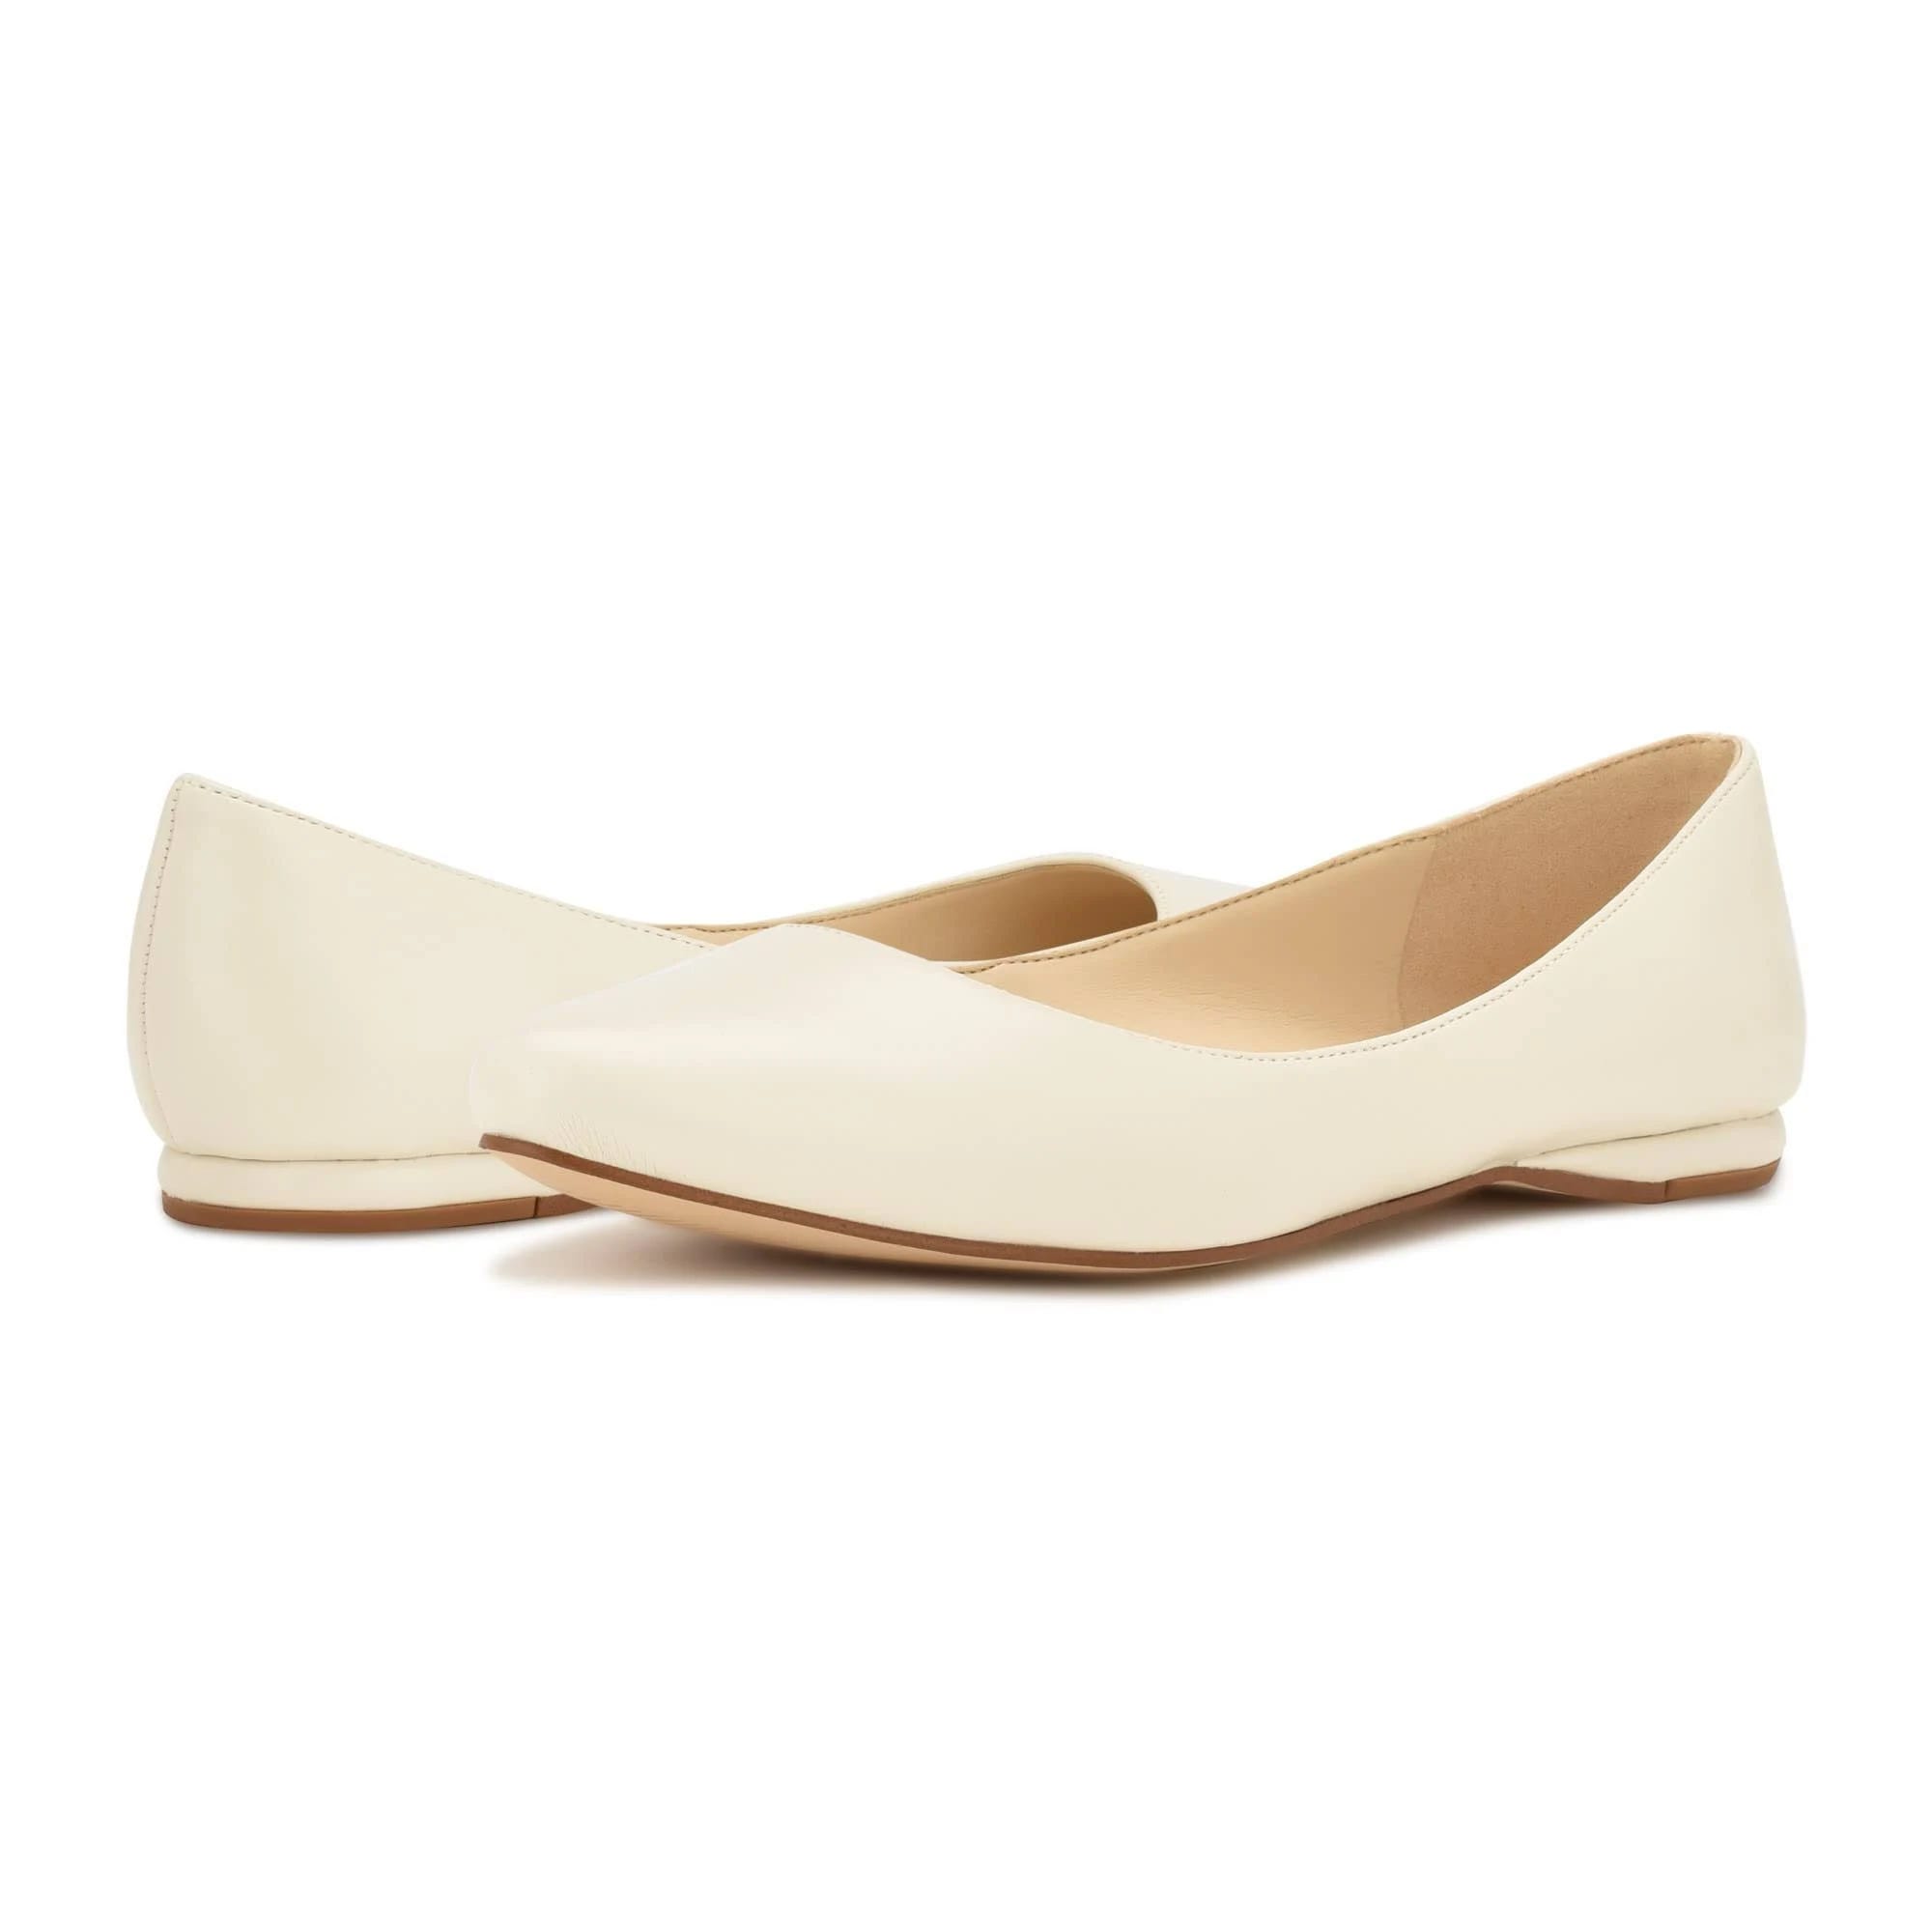 Cream Flat Shoes for Comfort and Style | Image